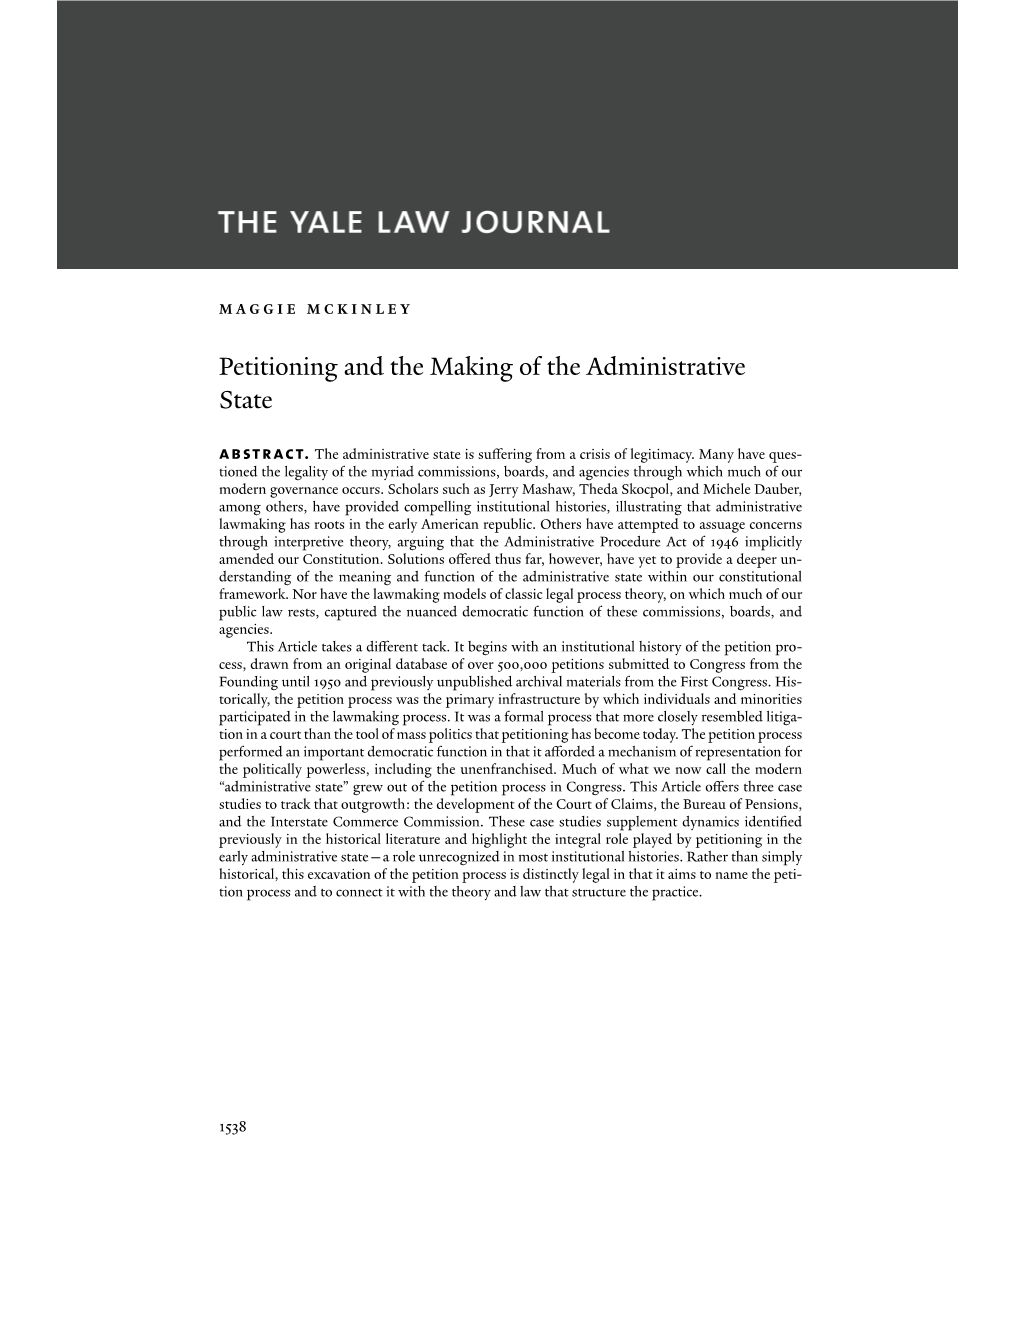 Petitioning and the Making of the Administrative State Abstract